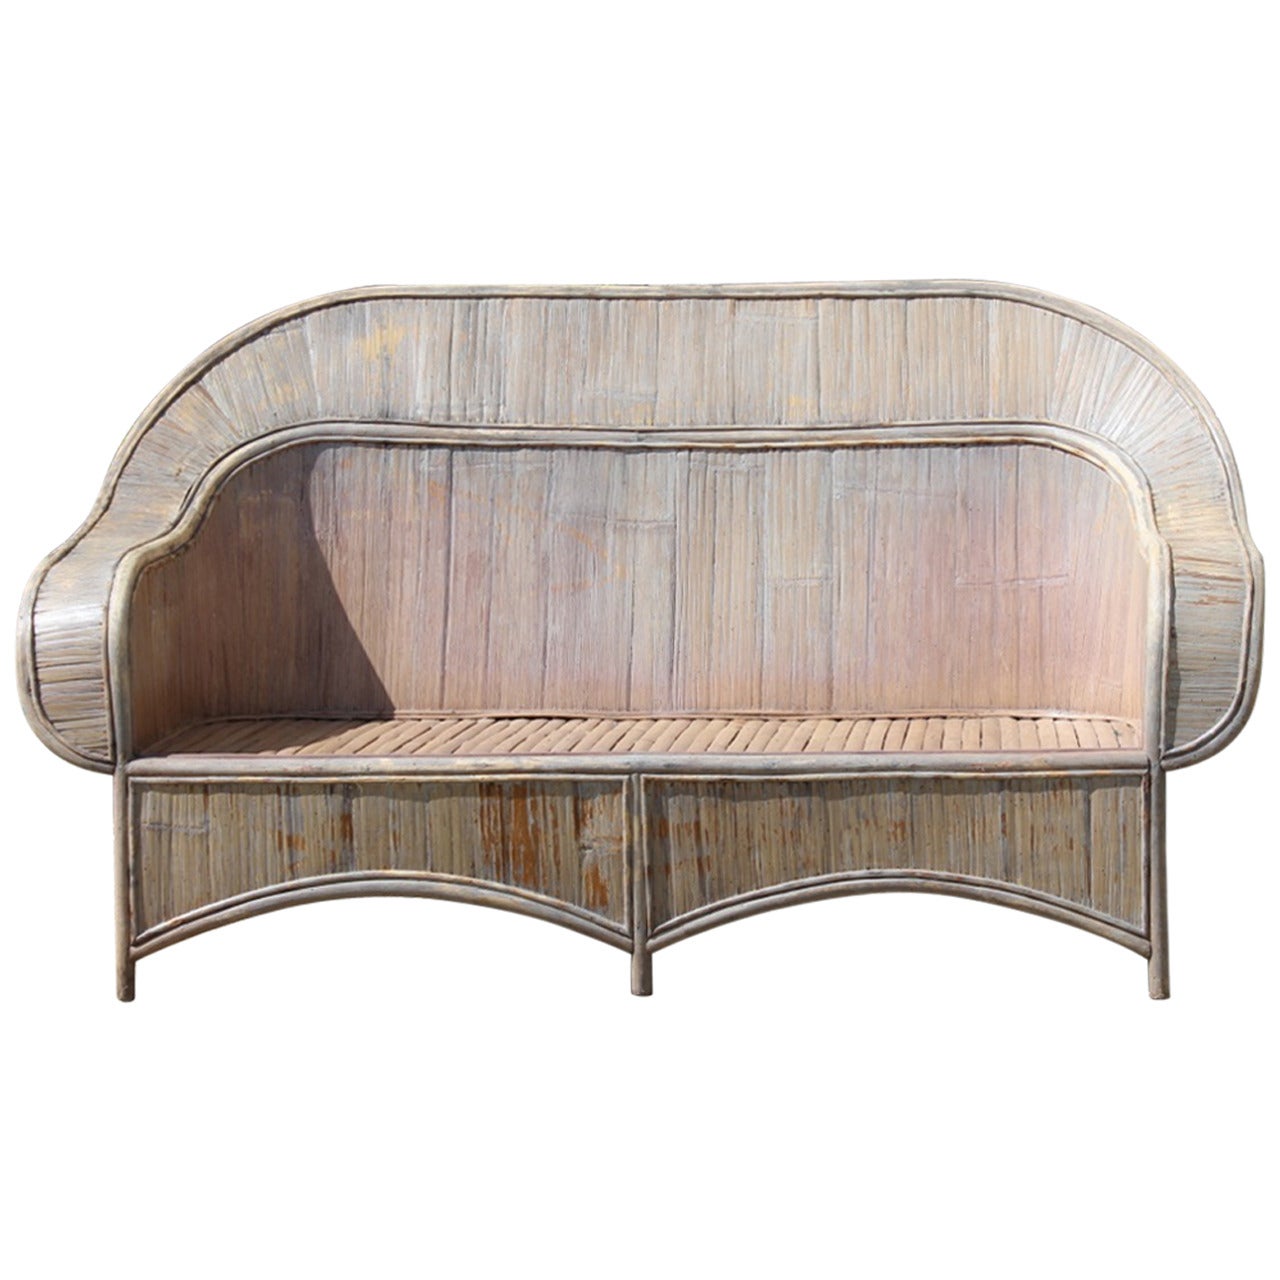 1930s Style Large Bamboo Garden Bench